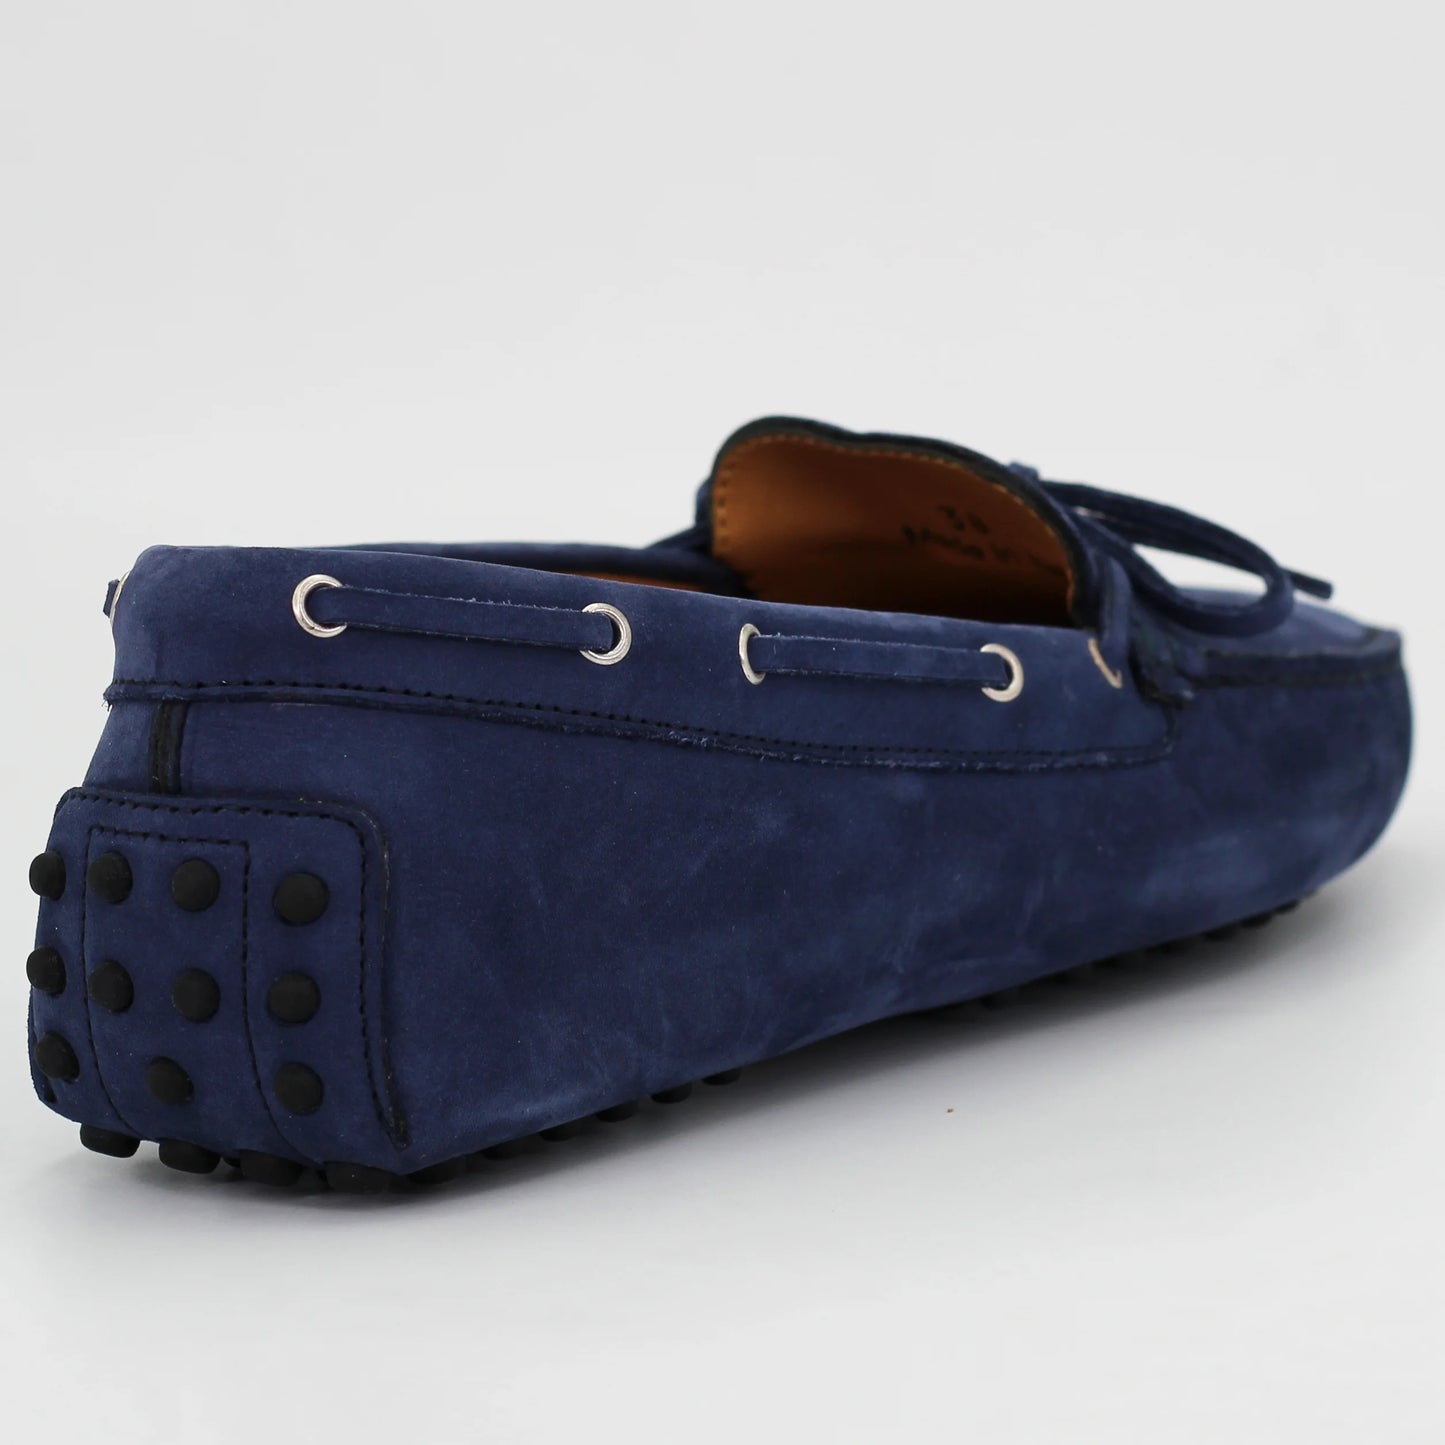 Shop Handmade Italian Leather suede moccasin in blue (COND04011) or browse our range of hand-made Italian shoes in leather or suede in-store at Aliverti Cape Town, or shop online. We deliver in South Africa & offer multiple payment plans as well as accept multiple safe & secure payment methods.